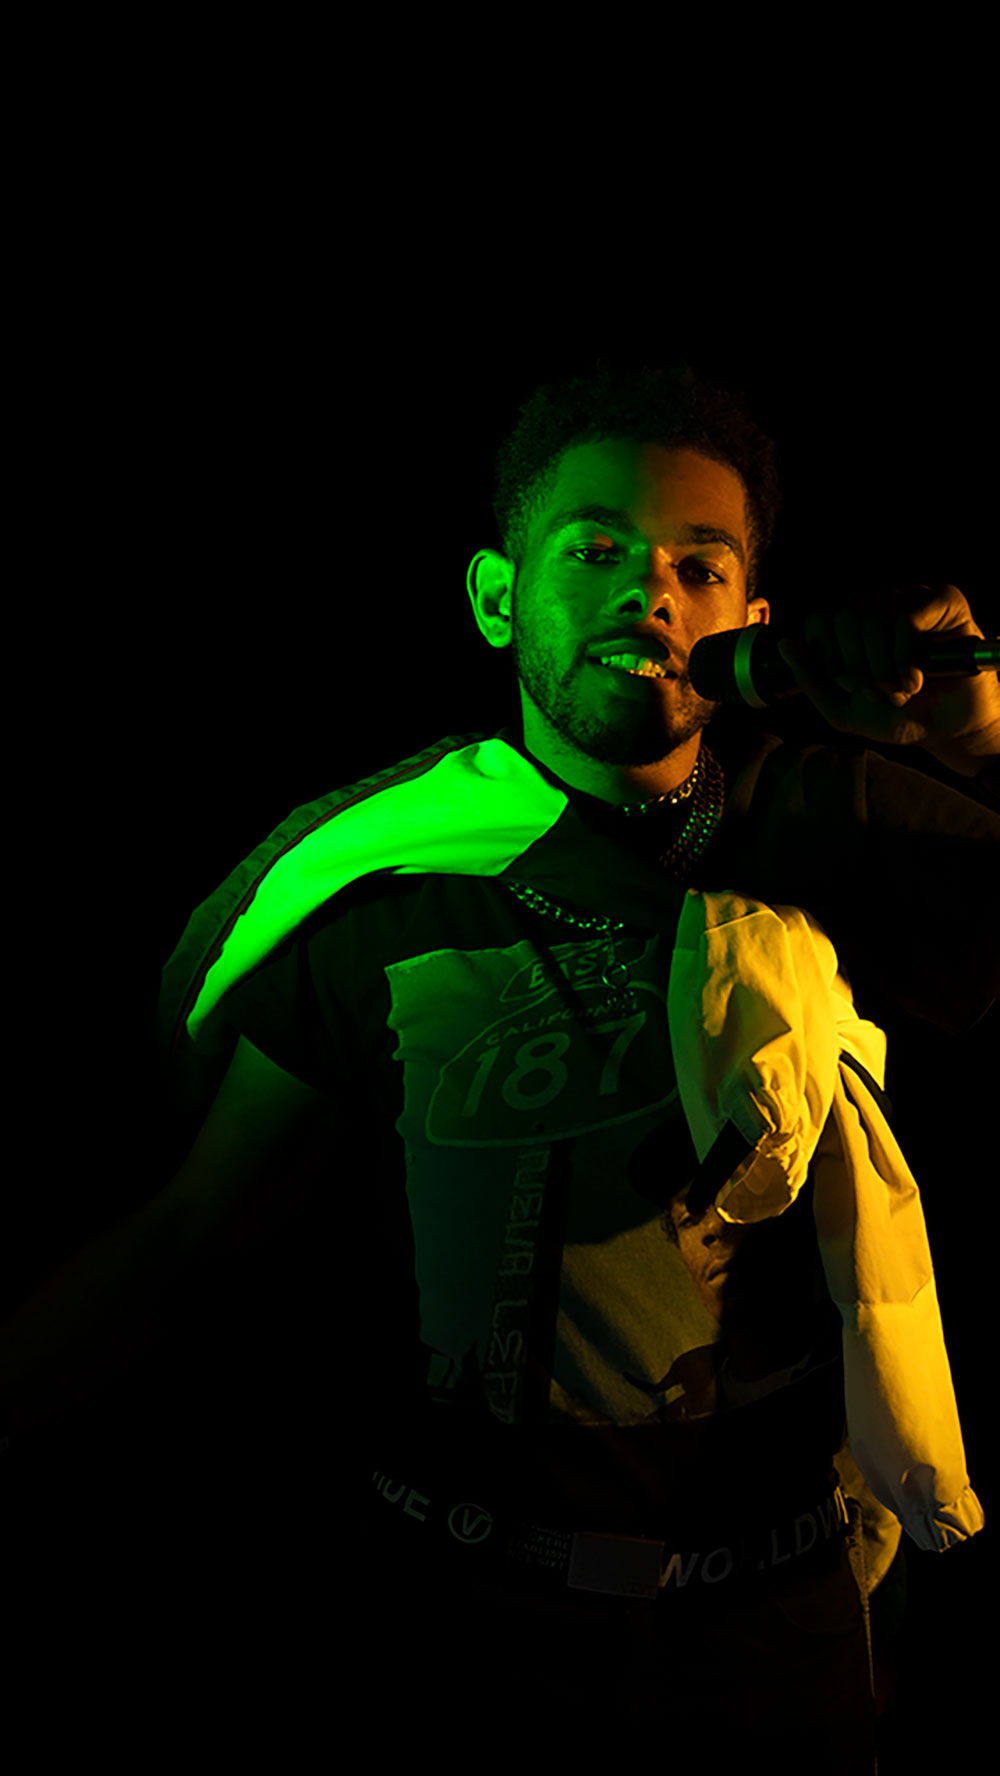 A photograph of a man singing into a microphone with a green light shining on him. 